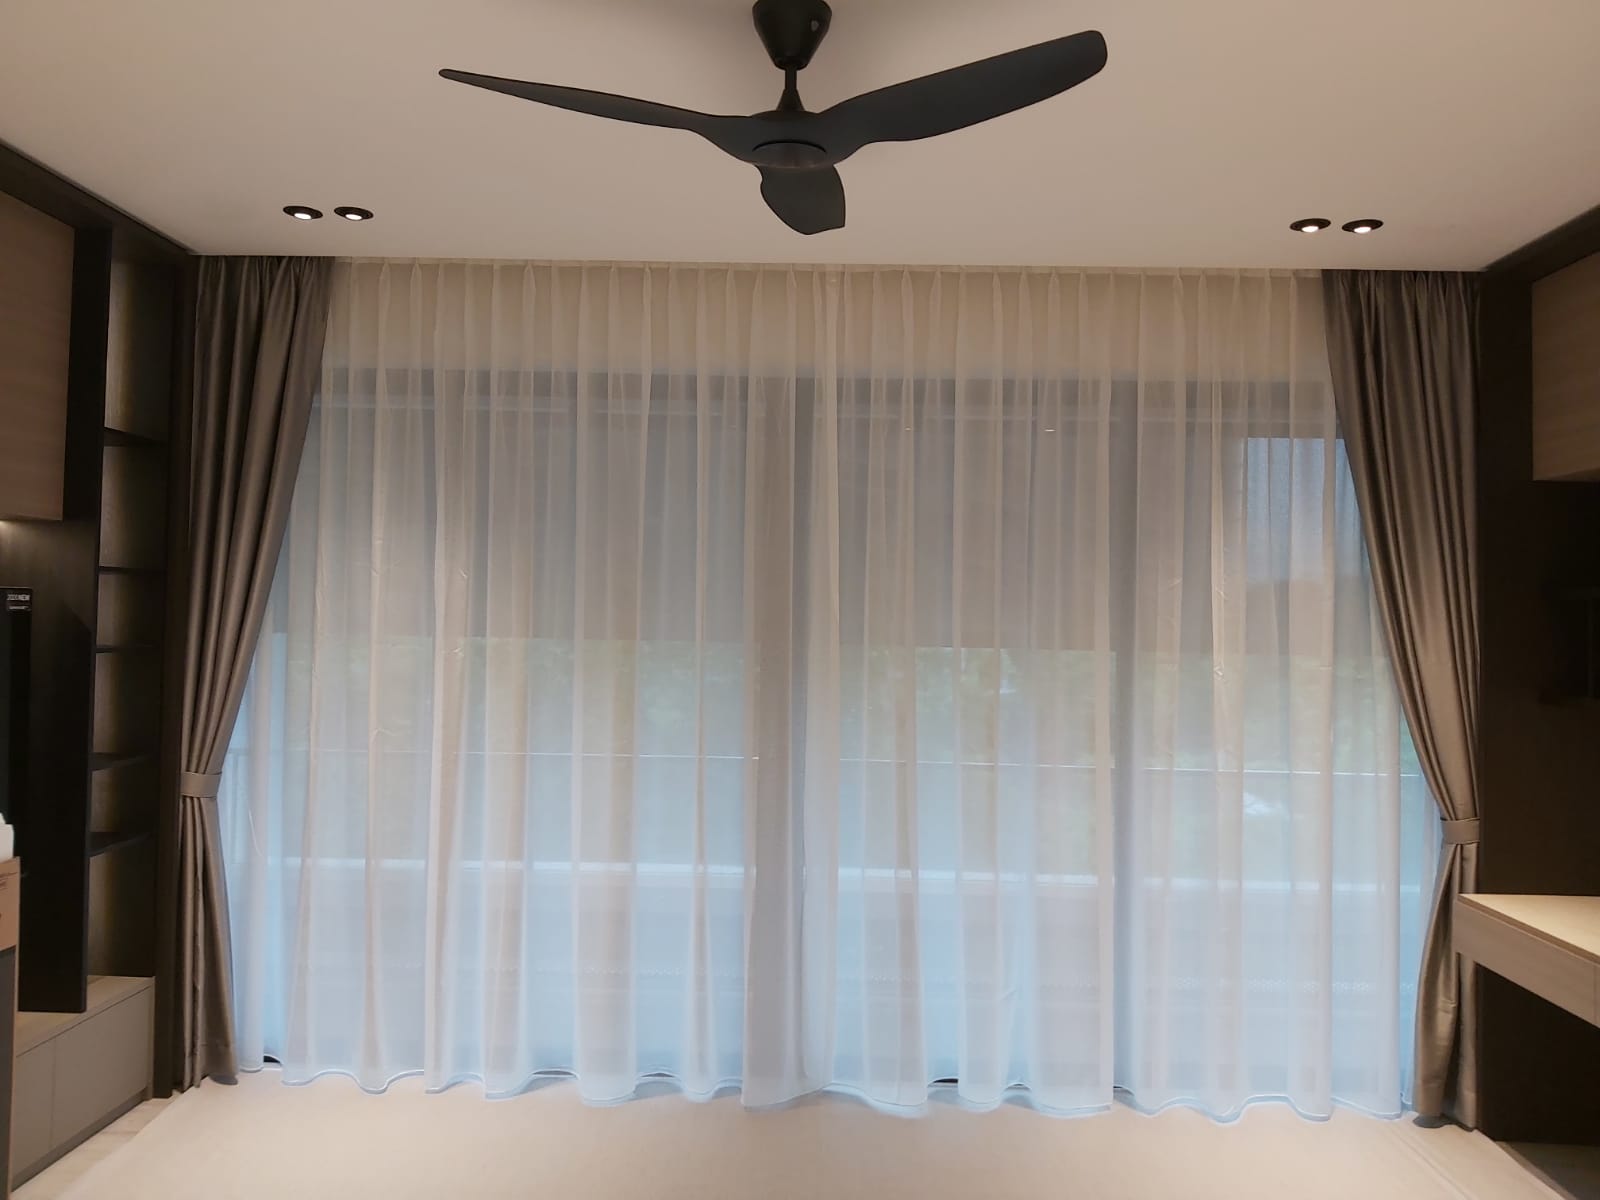 This is a Picture of Day and night curtain picture  for Singapore condo, day and night curtain for living hall, full height